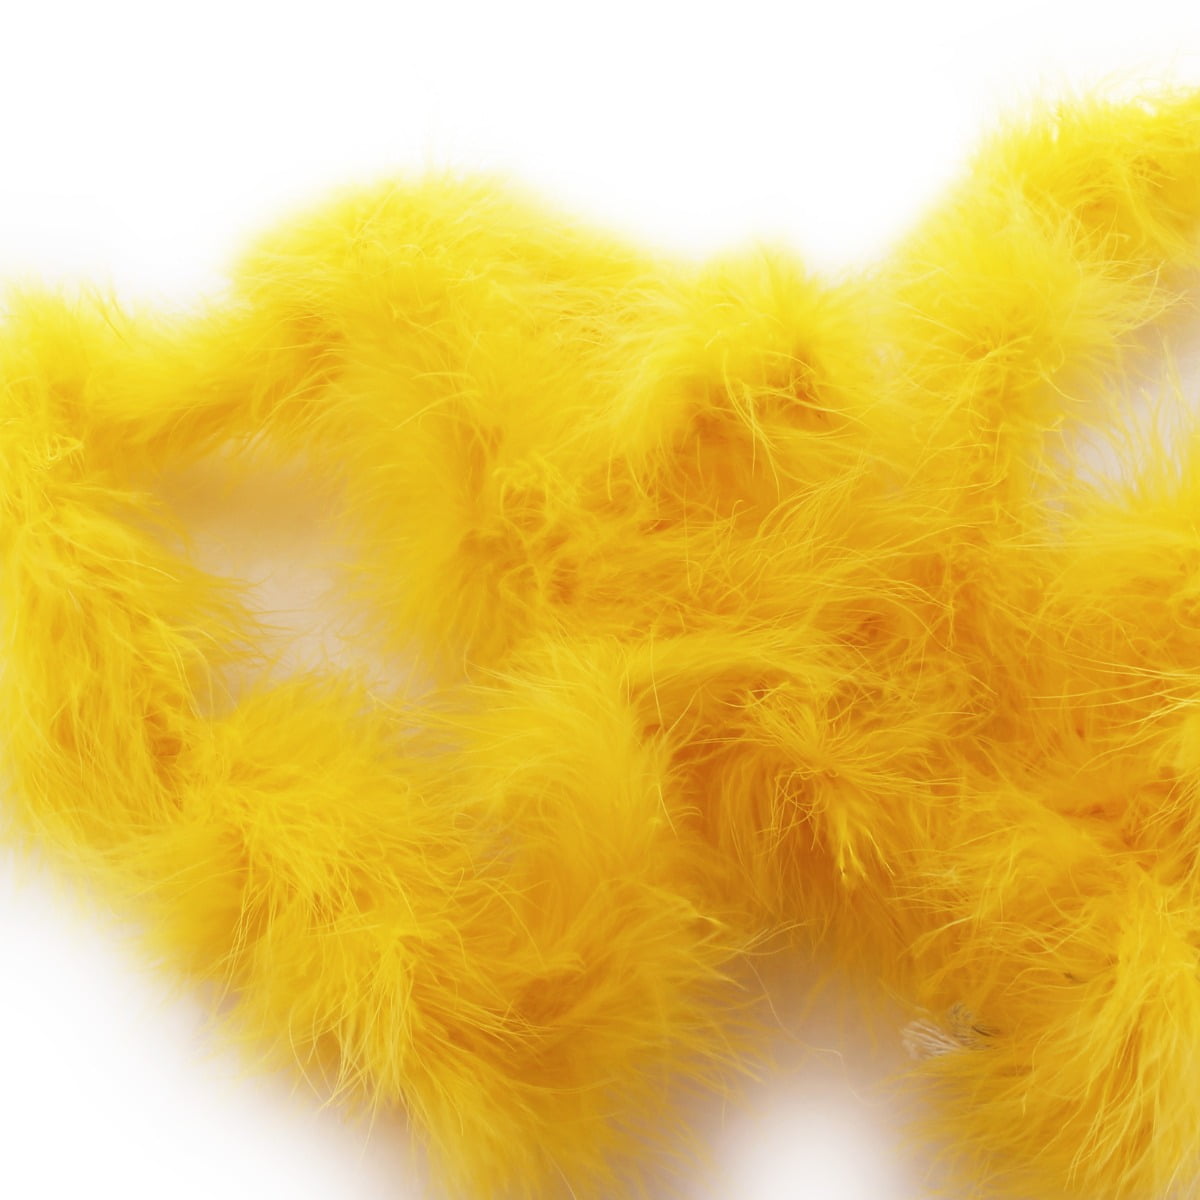 Golden Yellow 15 Grams Marabou Feather Boa 6 Feet Long Crafting Sewing Trim 